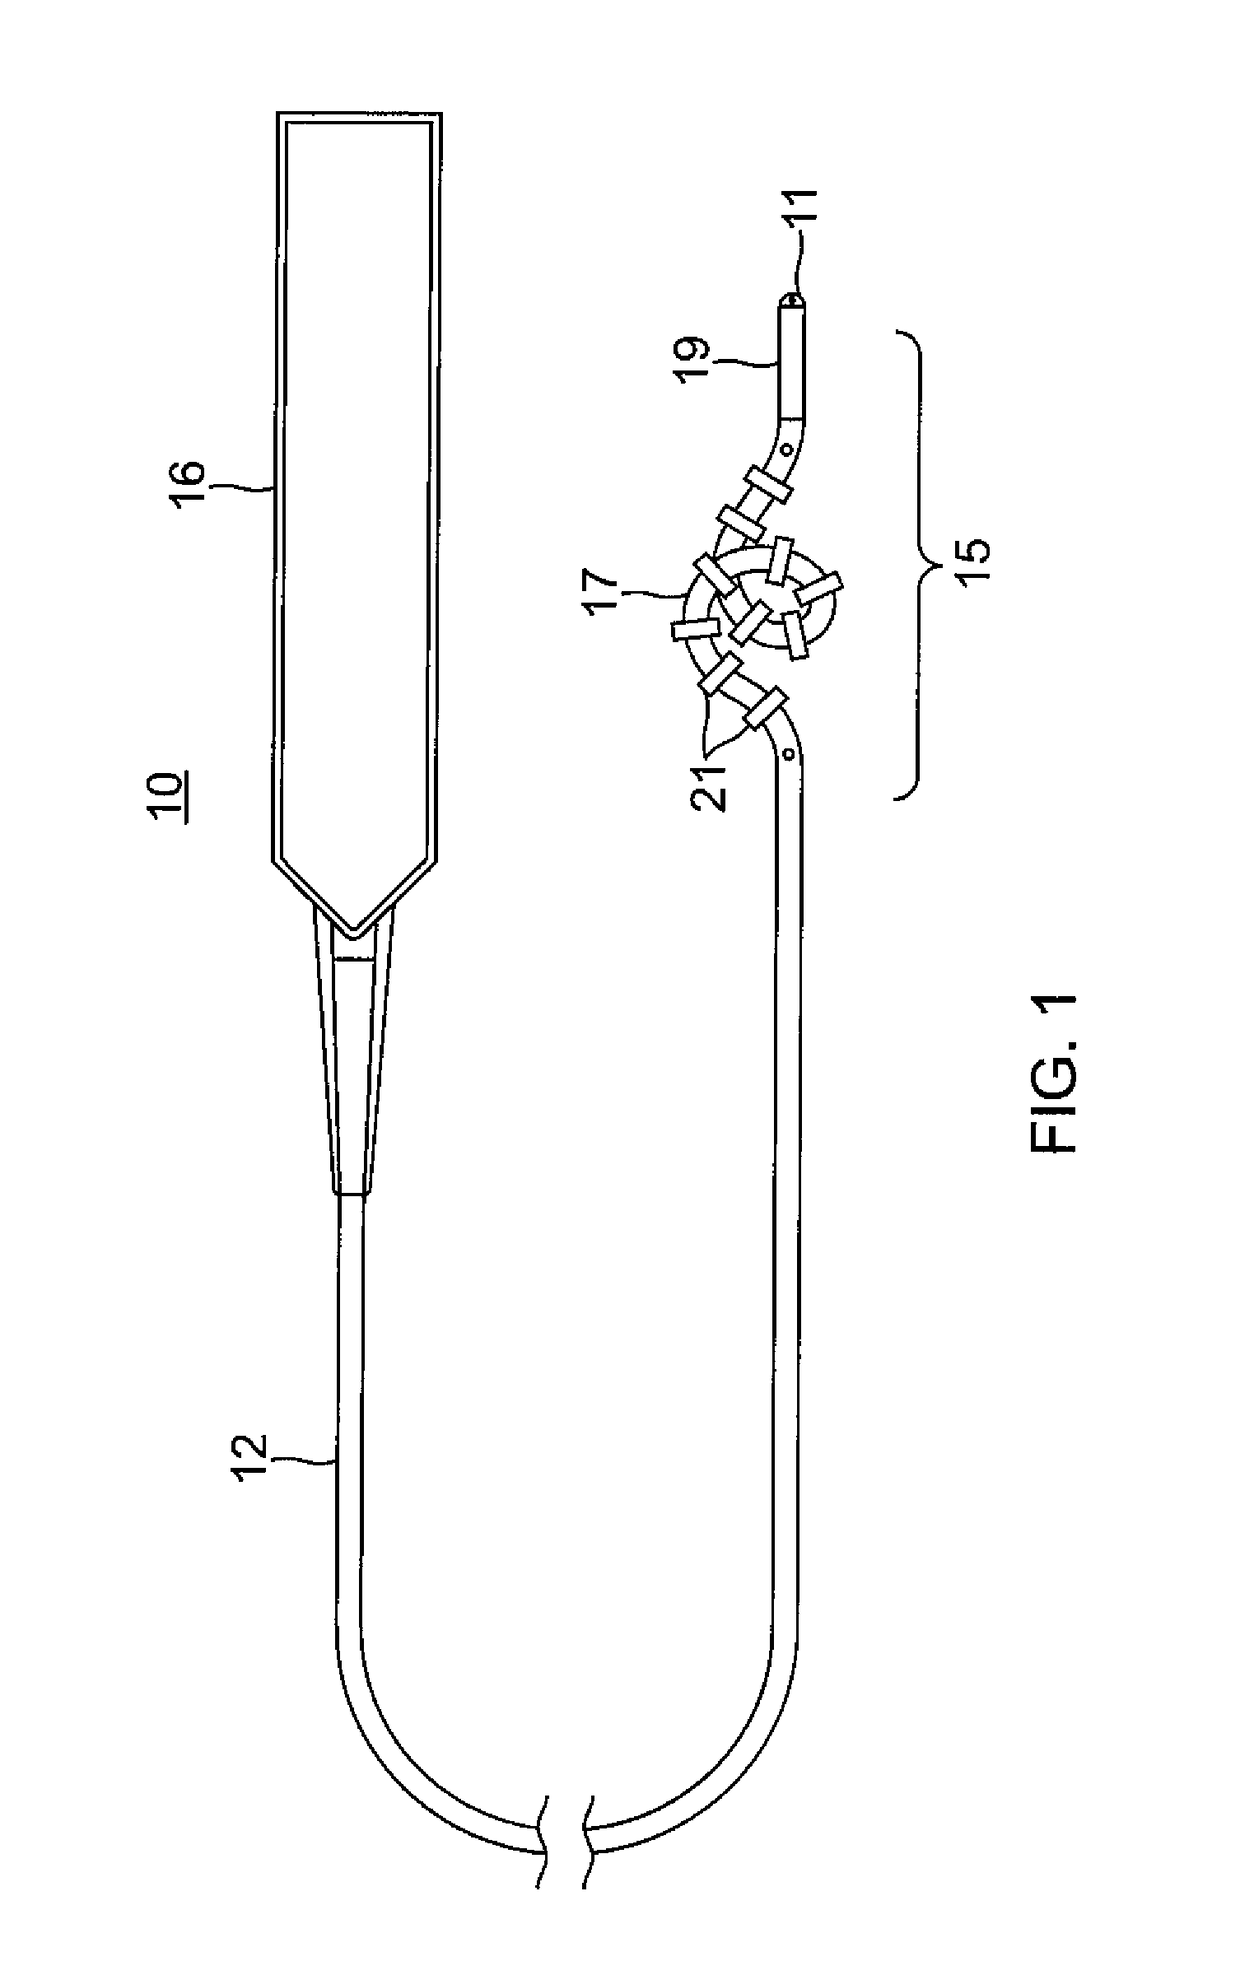 Catheter adapted for use with guide wire for accessing vessels